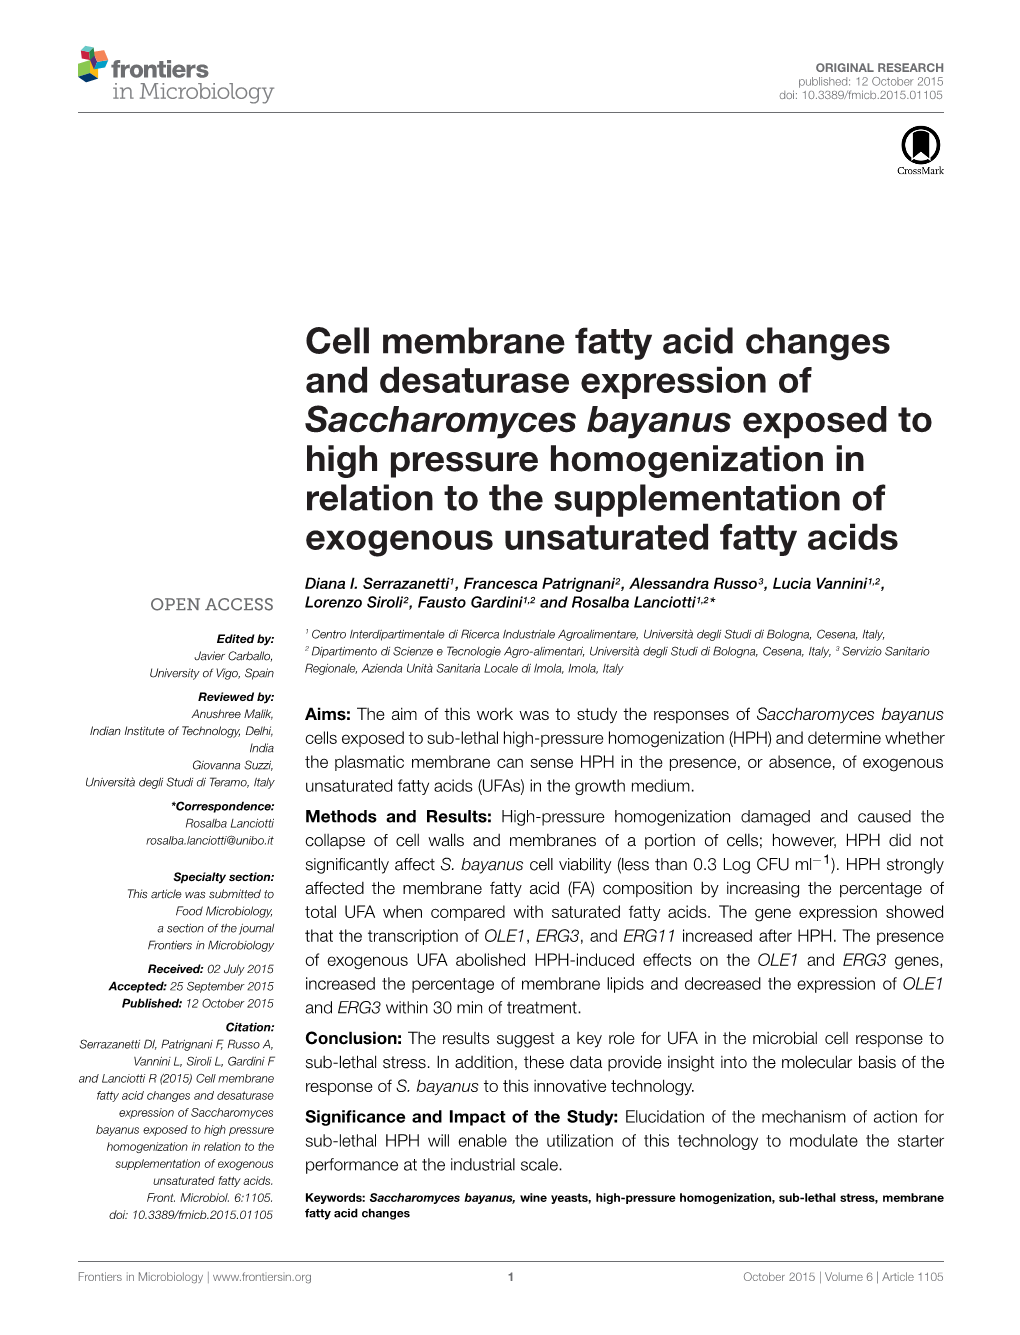 Cell Membrane Fatty Acid Changes and Desaturase Expression of Saccharomyces Bayanus Exposed to High Pressure Homogenization in R